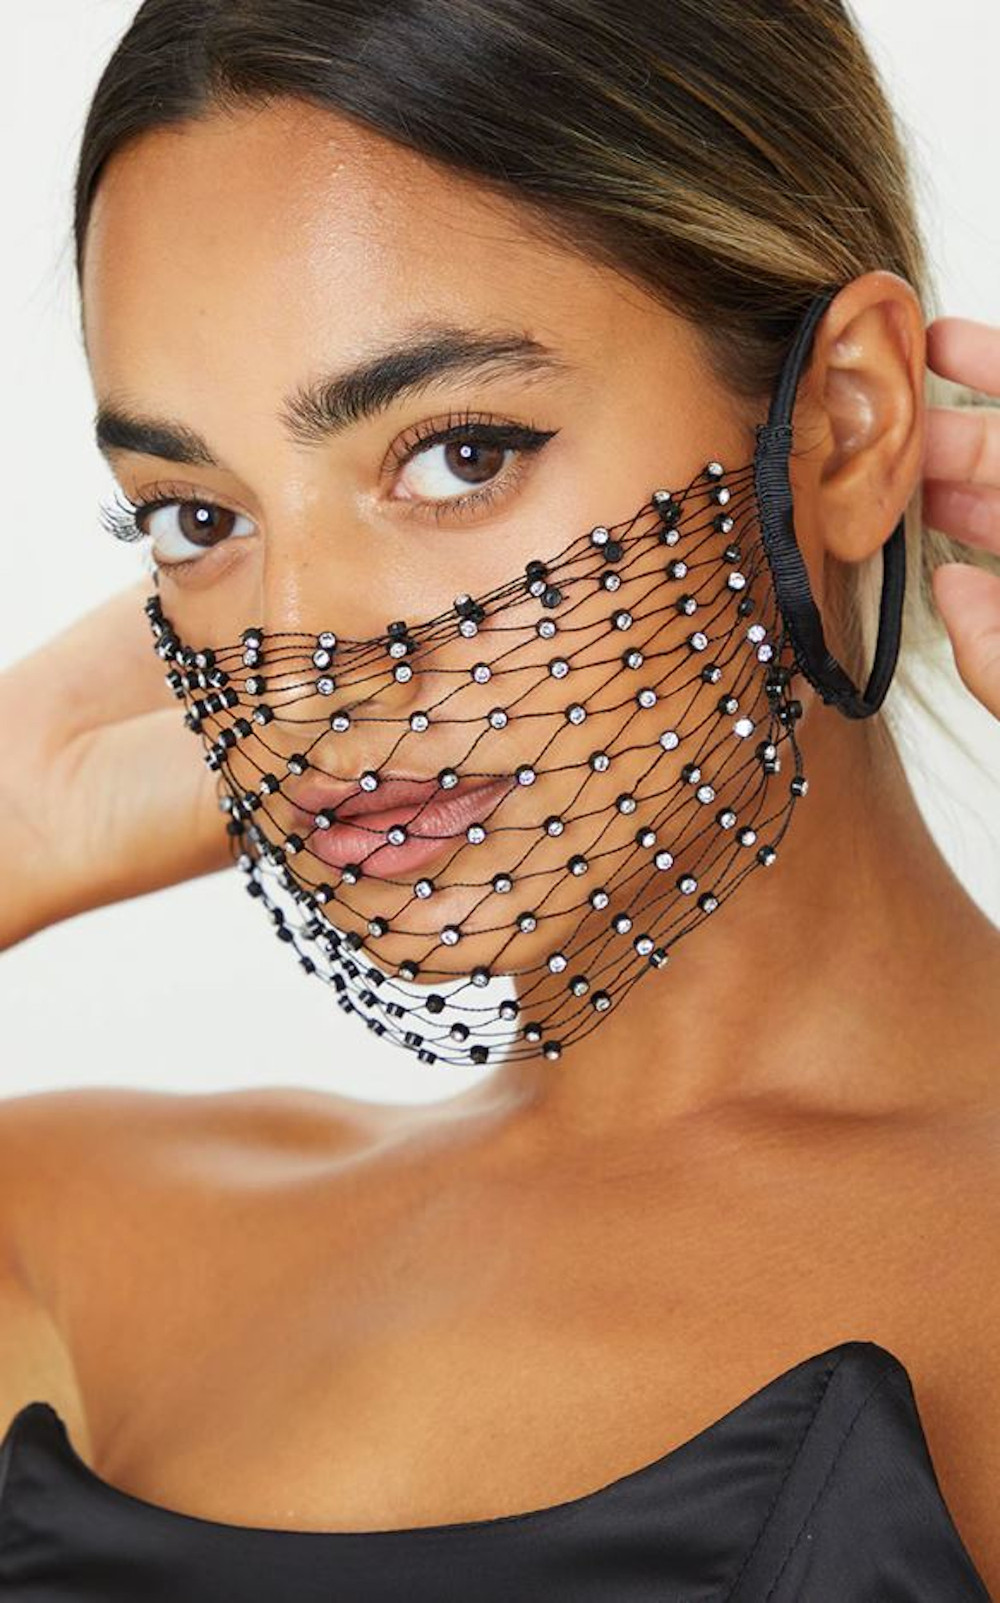 Using a face mask to block coronaviruses has been compared to using a chain link fence to stop mosquitos.